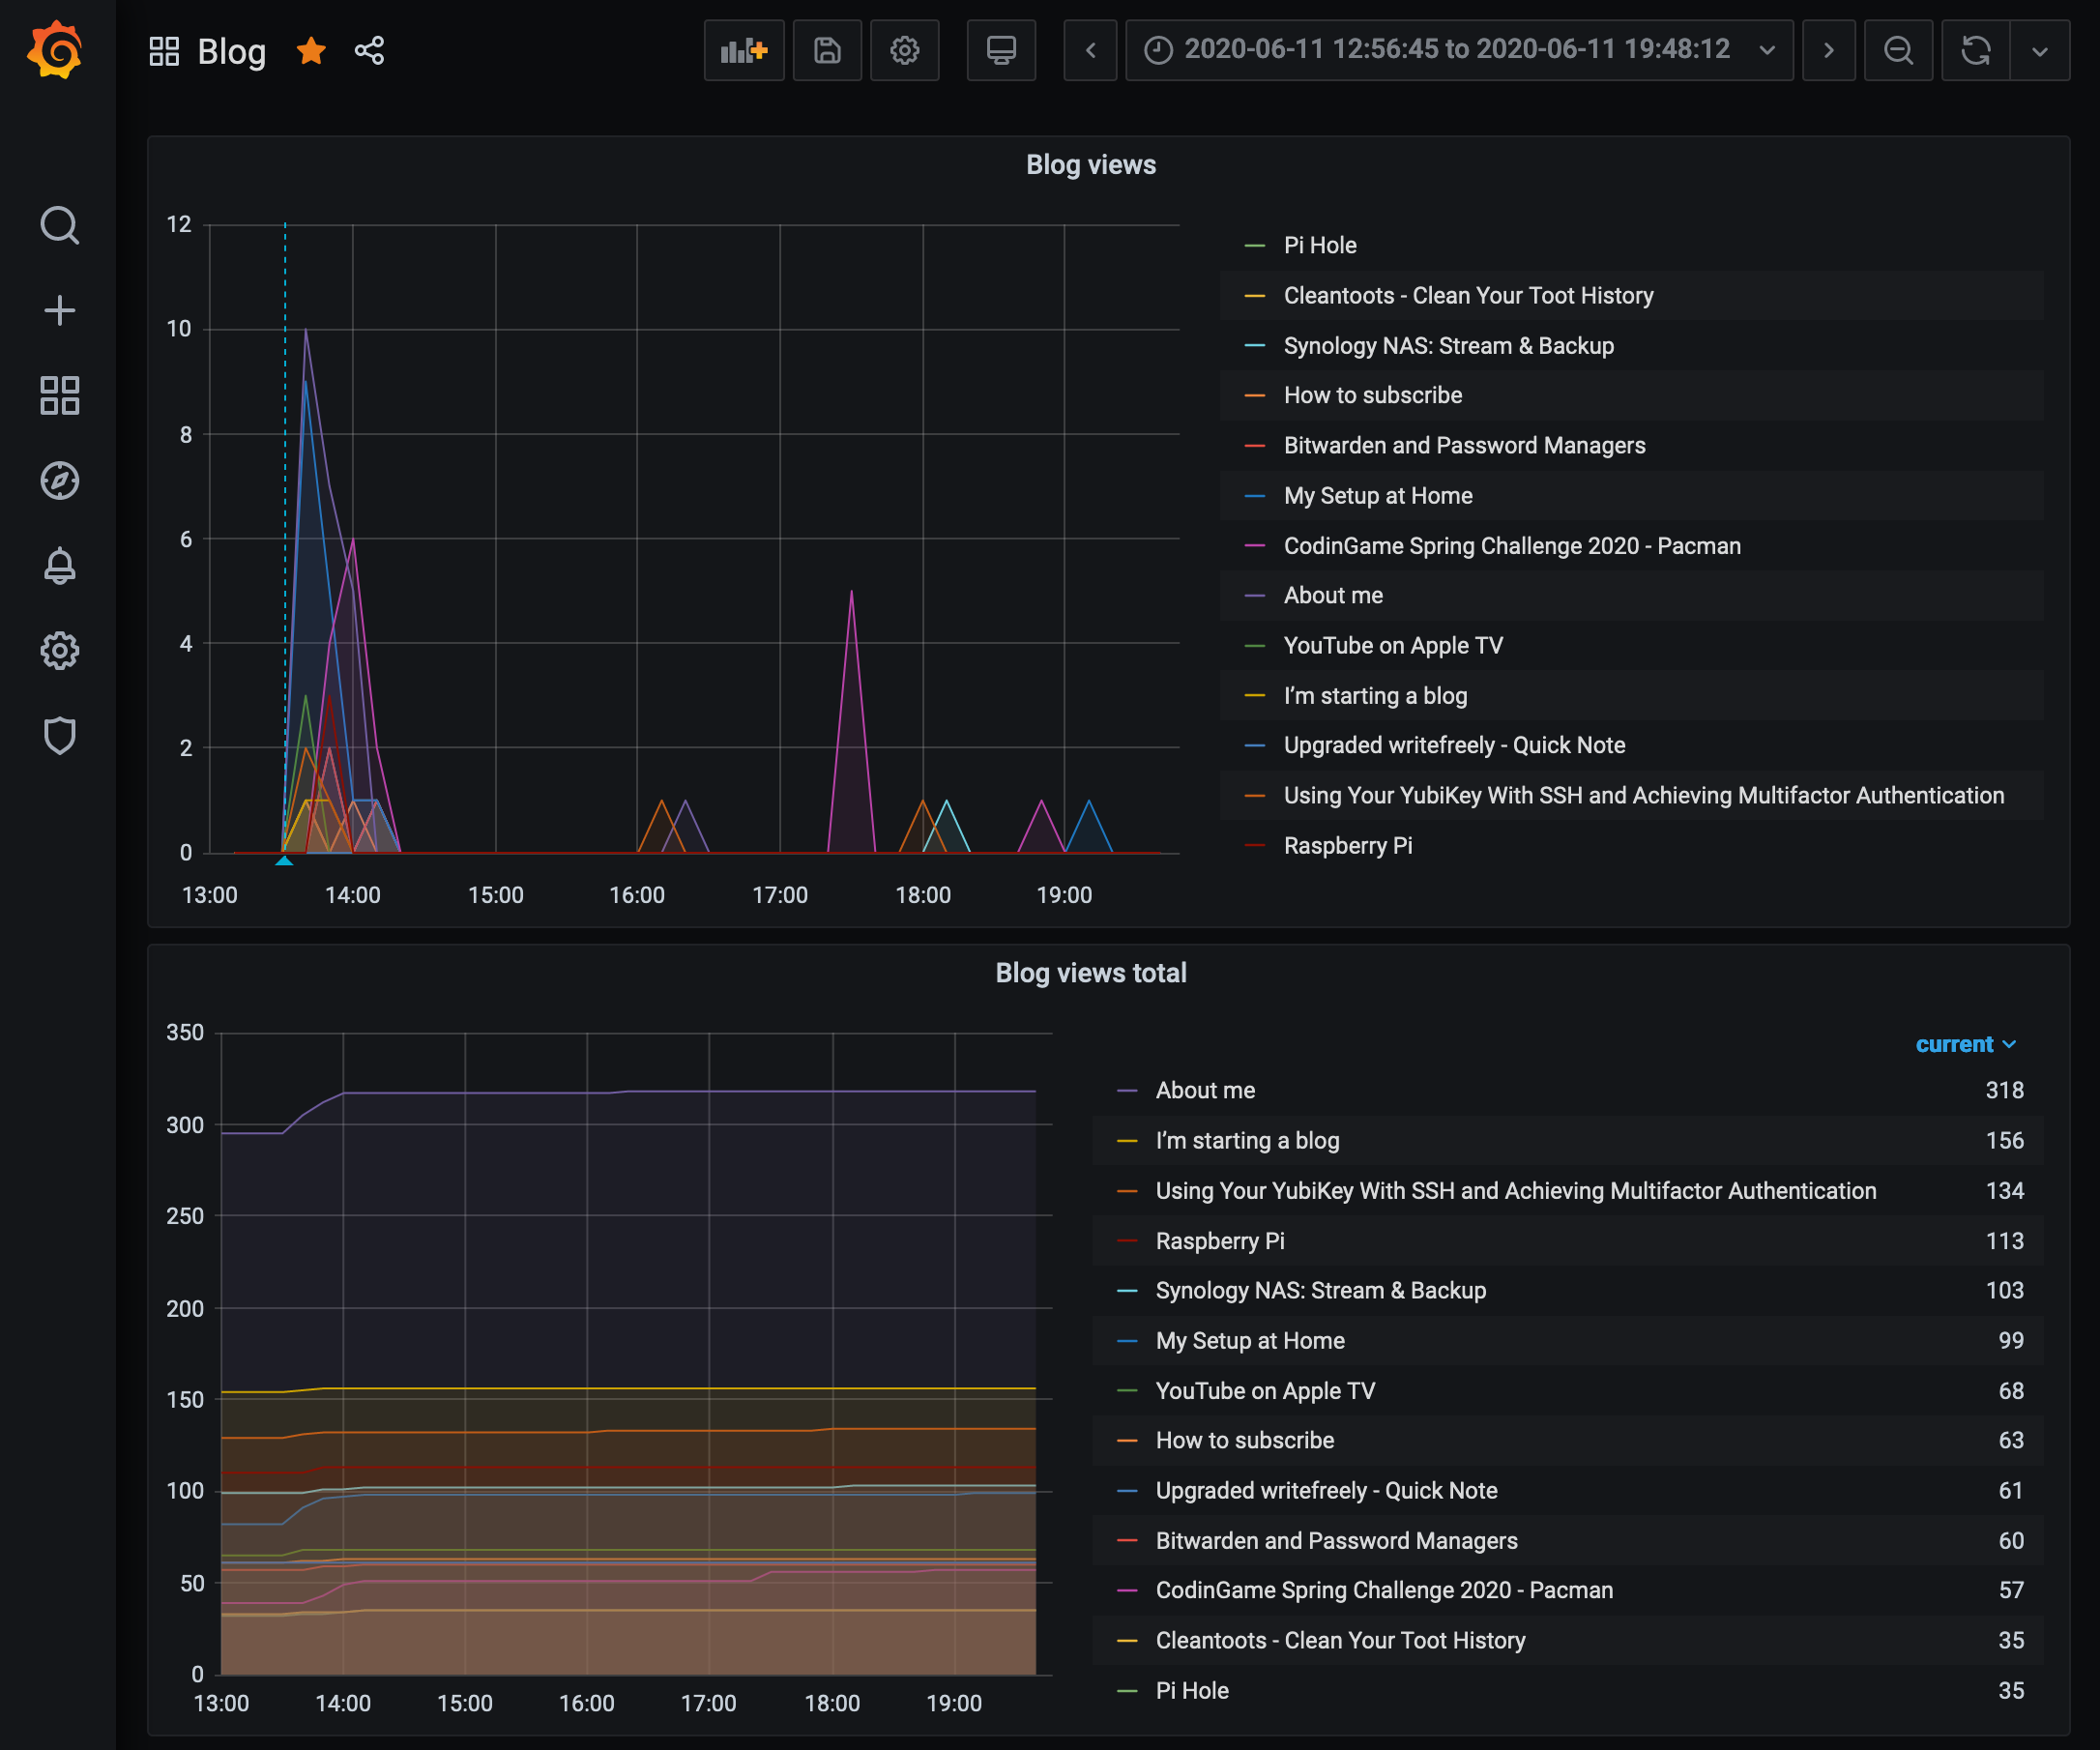 Same image as cover: two Grafana graphs: one to view the raw view counts evolving, the other to display the difference between two data points